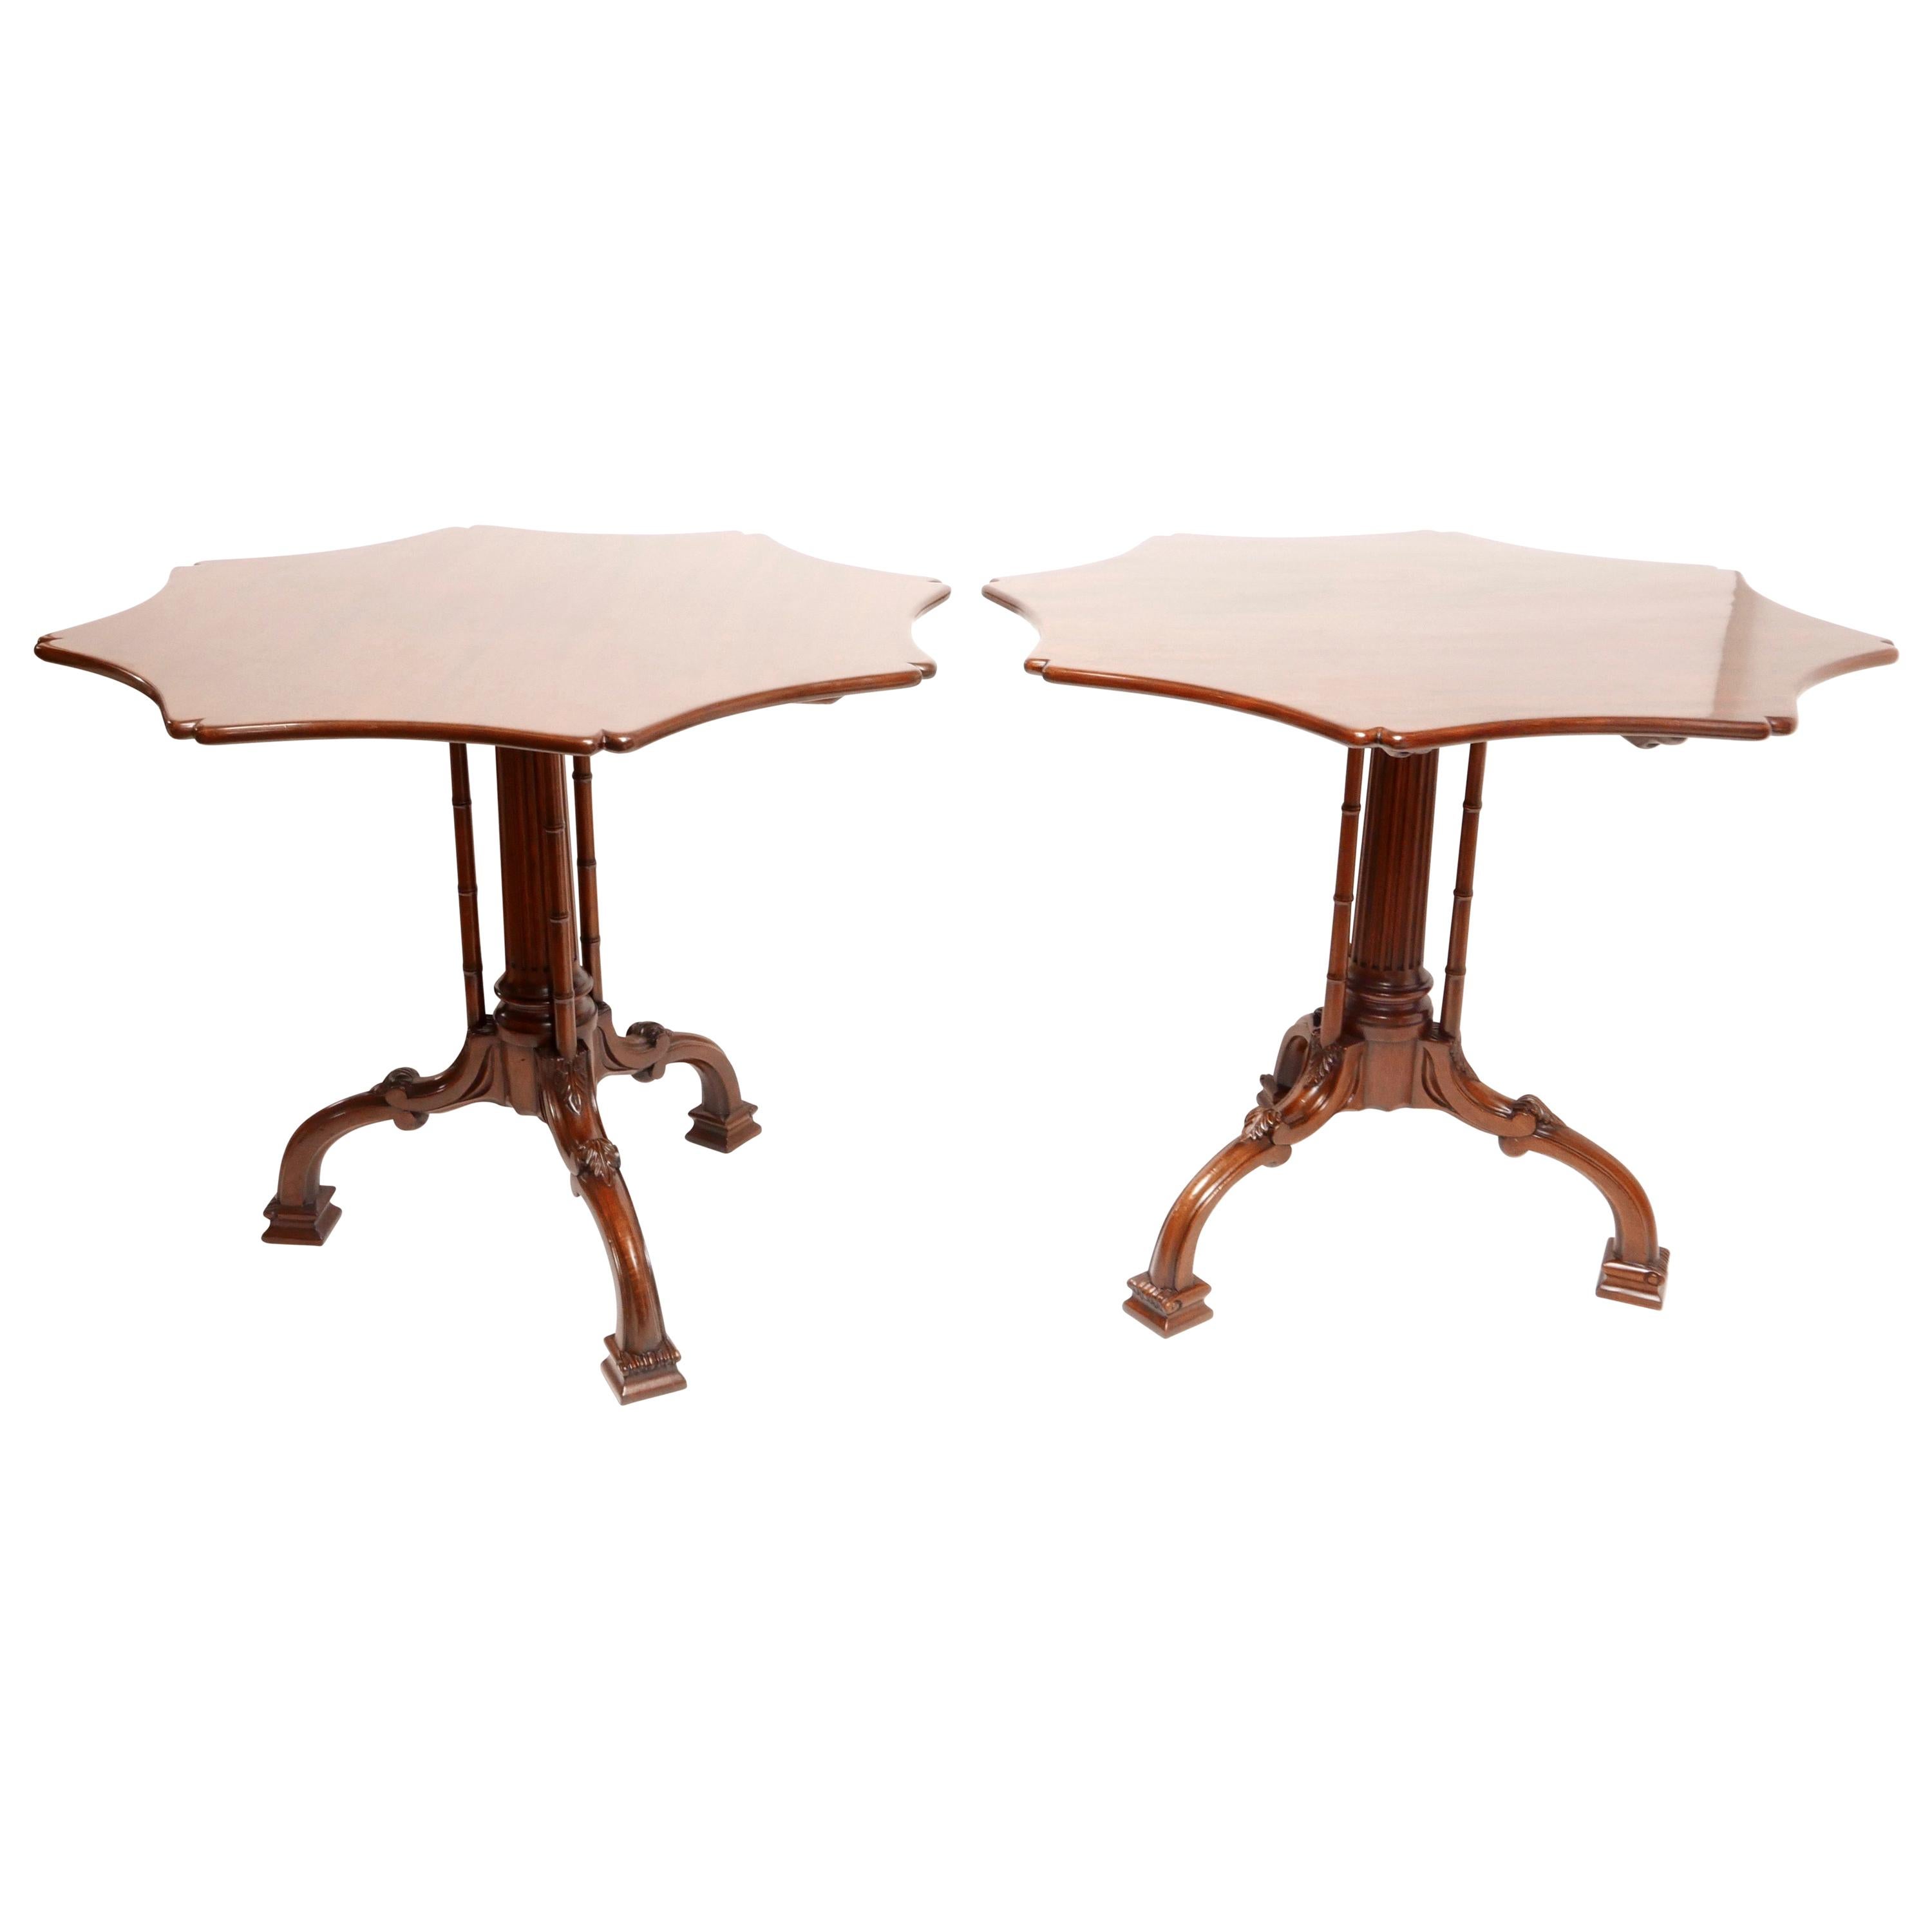 Pair of Vintage Chippendale Style Mahogany Tilt-Top Tables, by Burton Ching